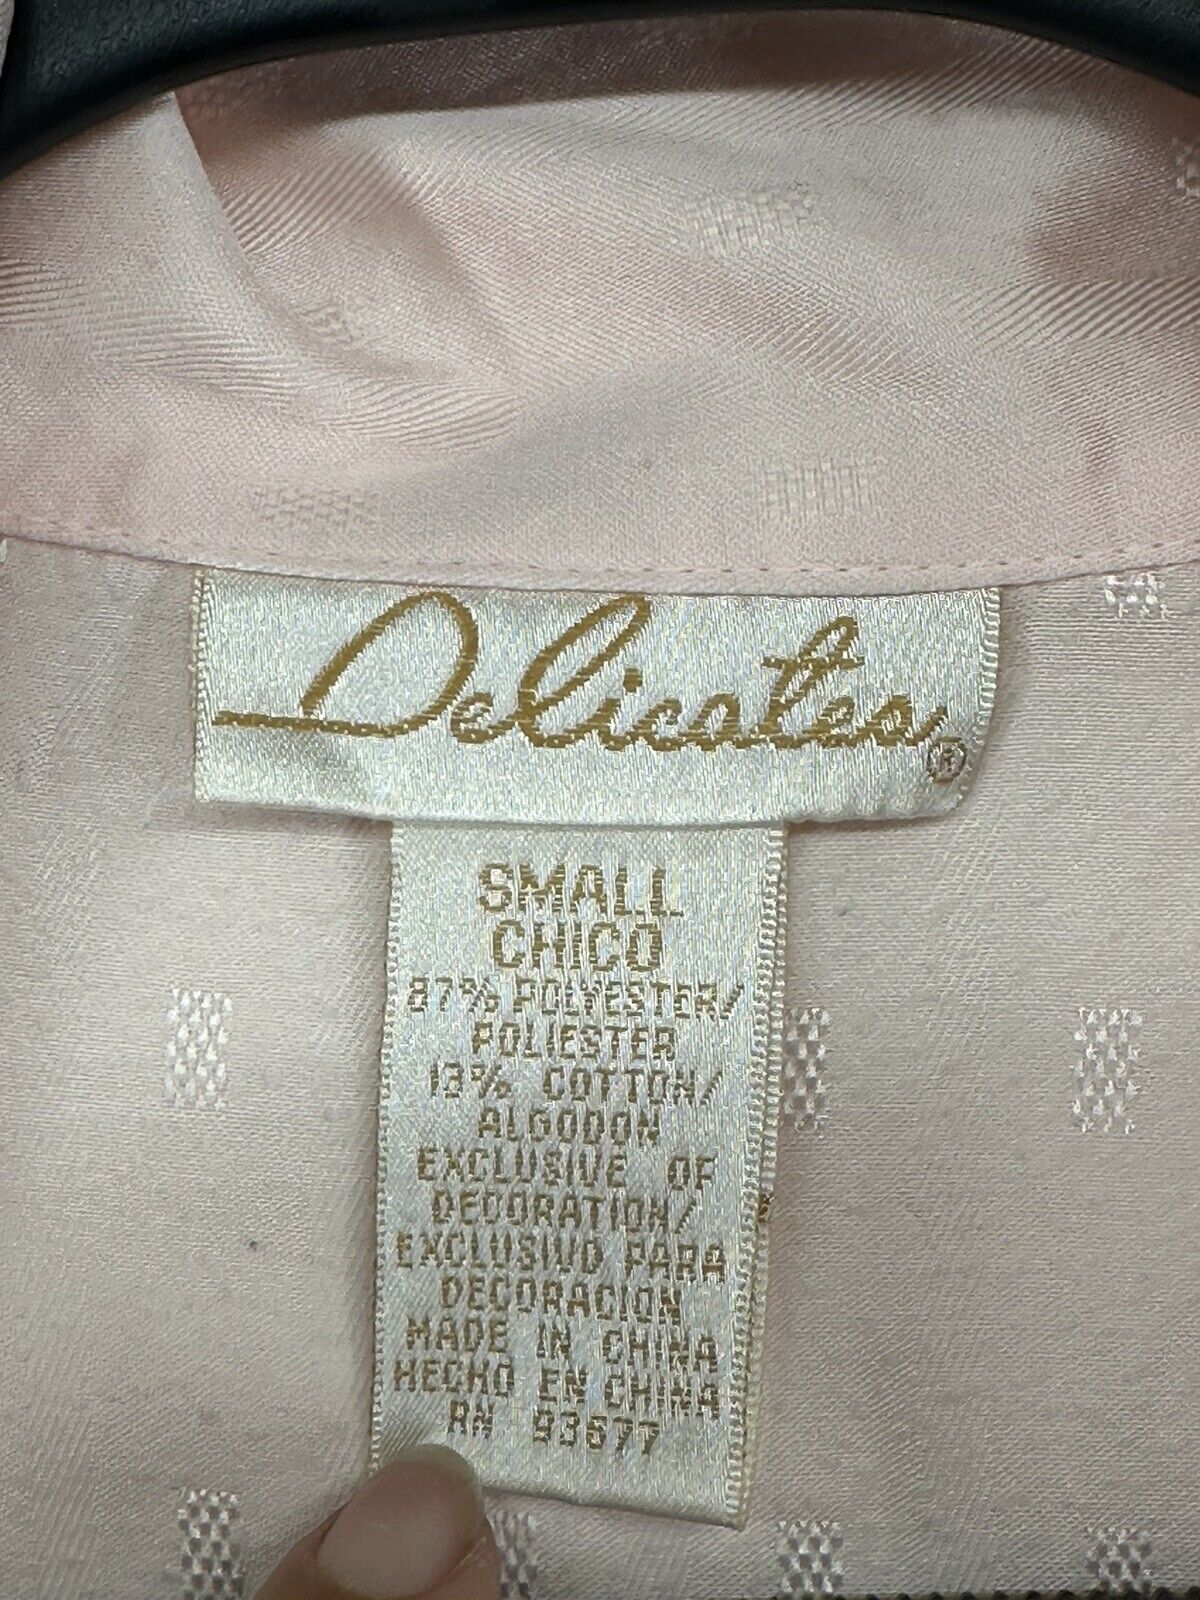 Delicates Pink Vintage Women’s Small Chico Night … - image 4